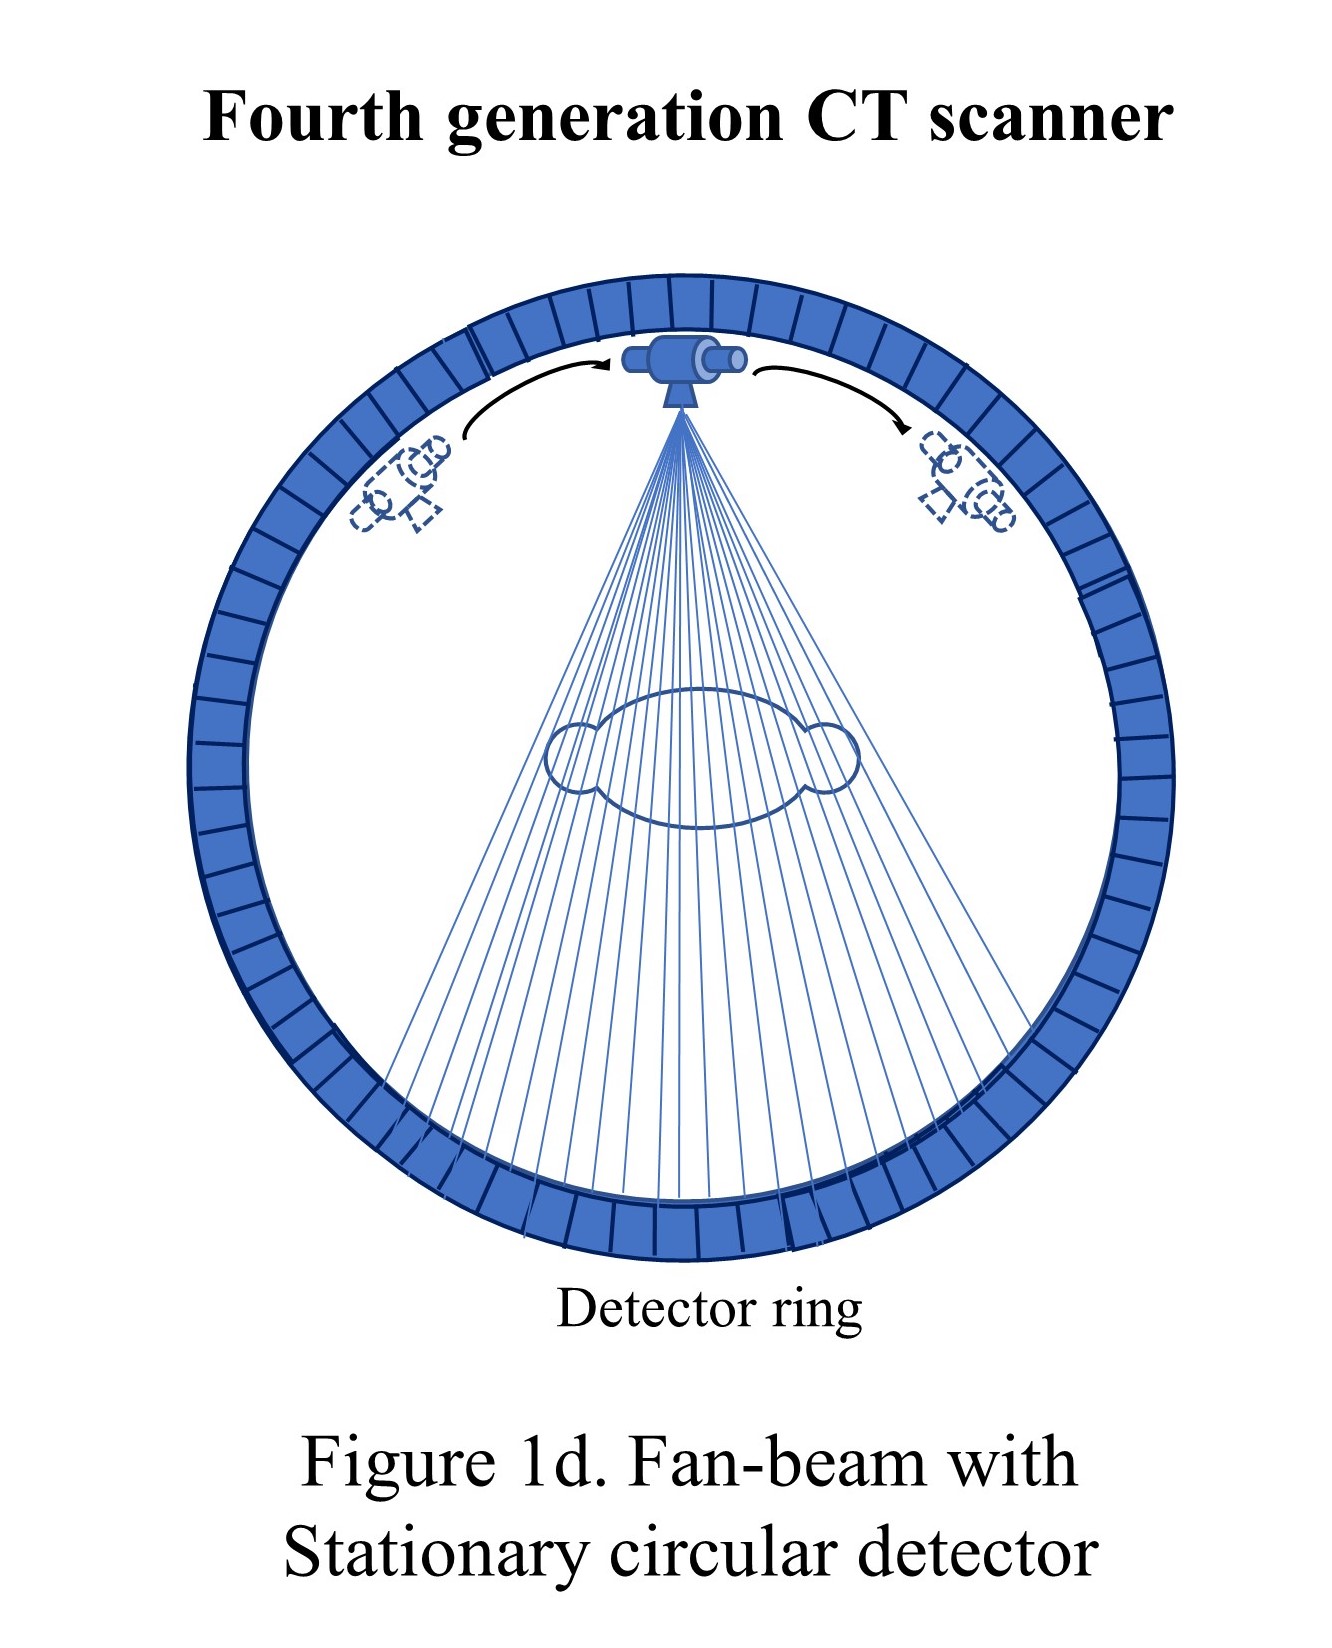 Fan-beam, rotate only